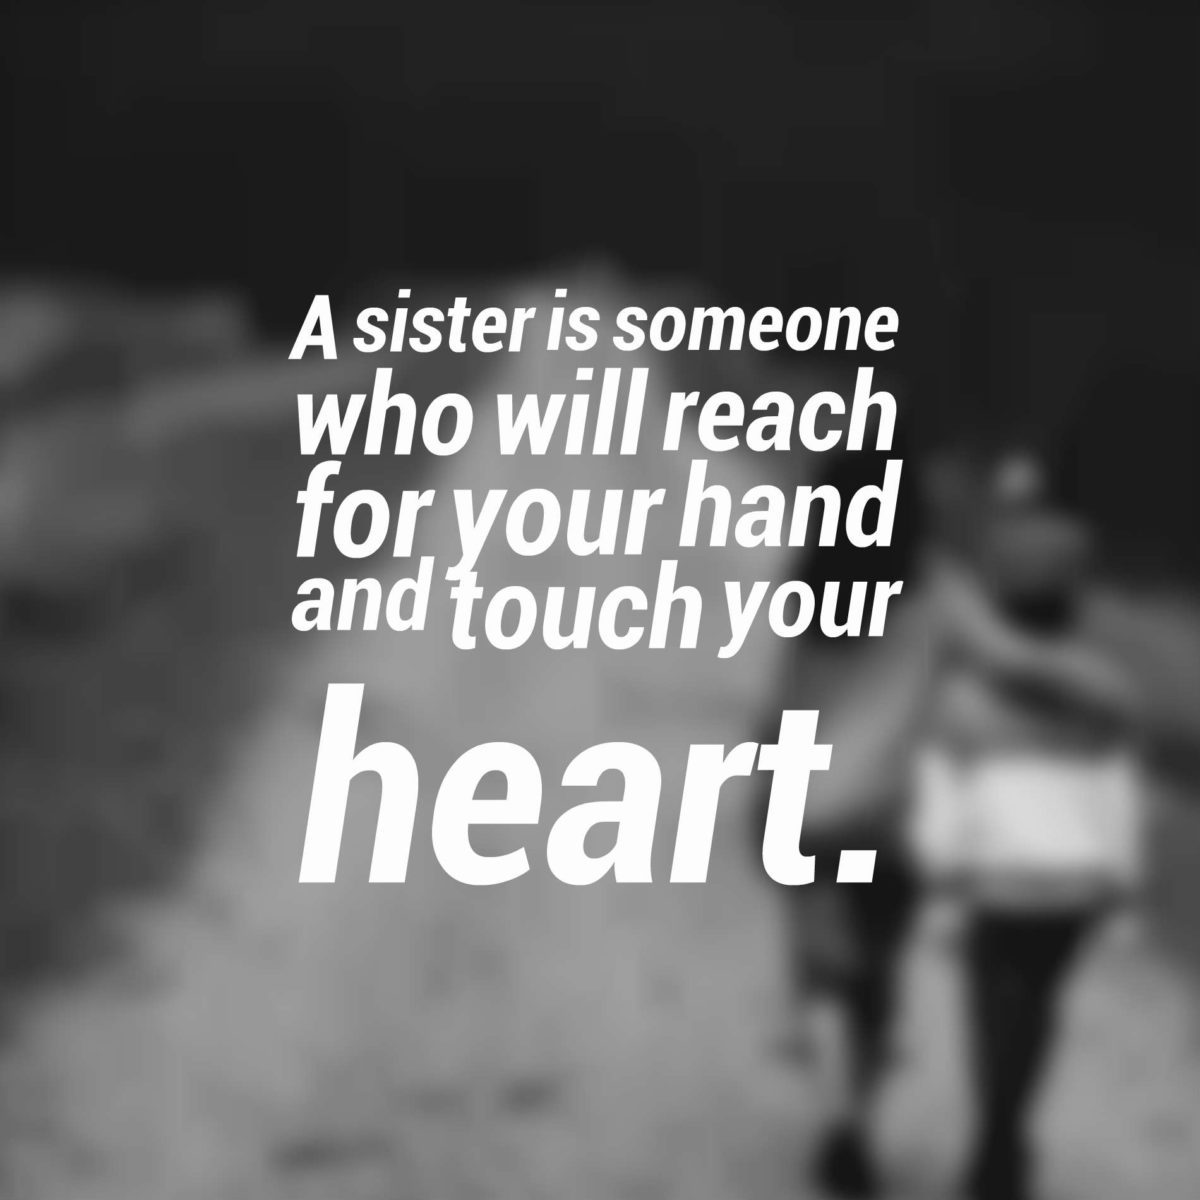 Cute Brother And Sister Quotes.